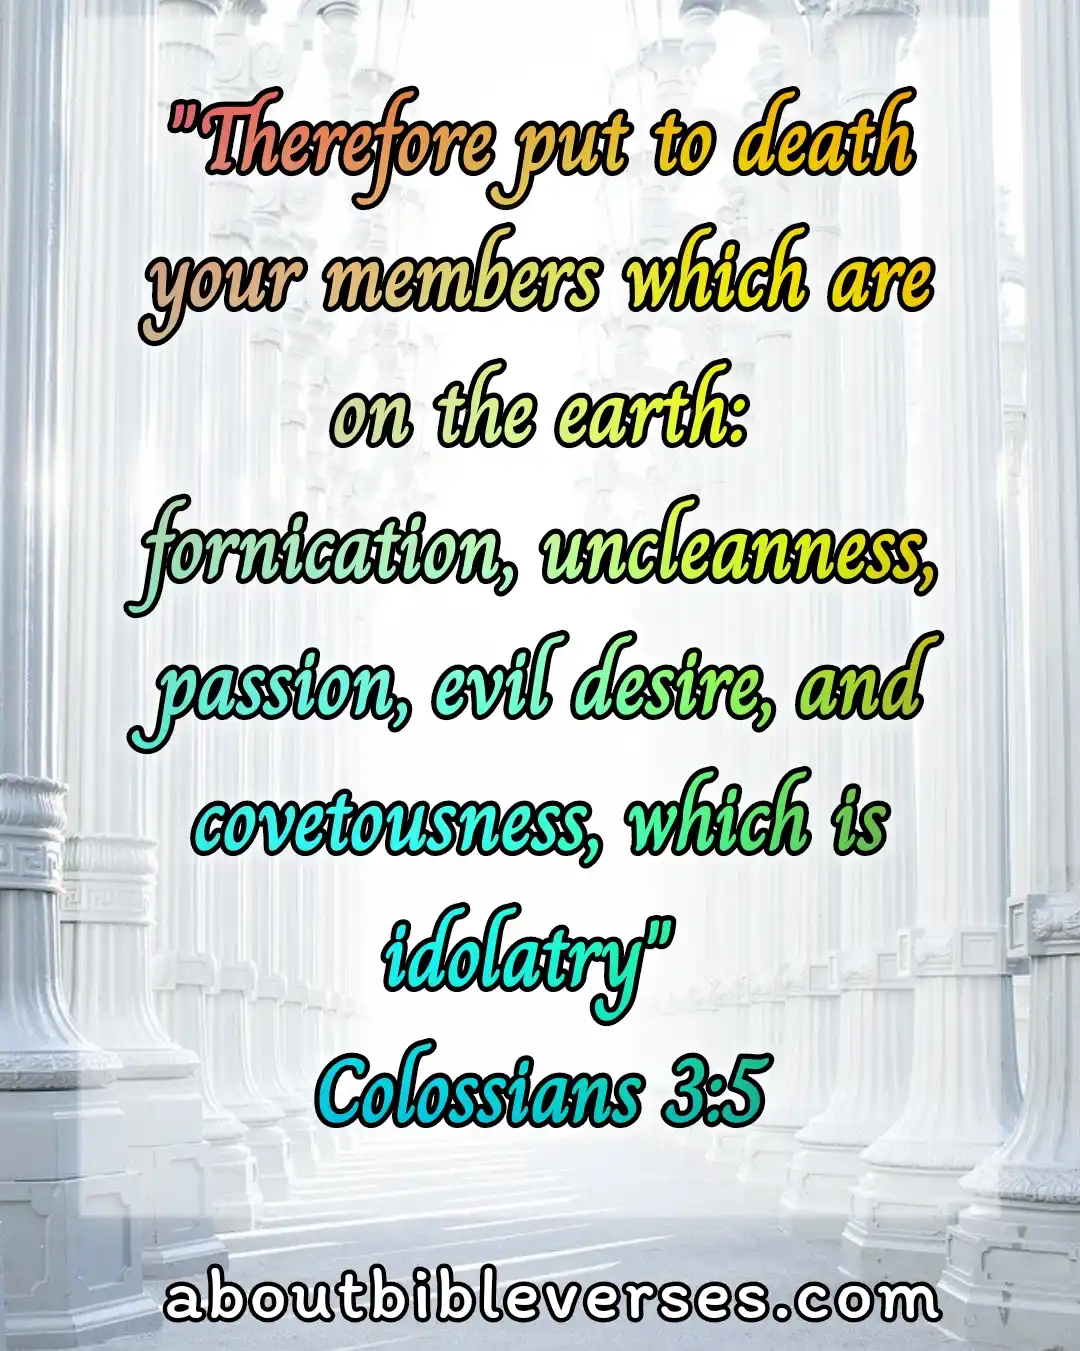 Bible Verses About Bad Behavior (Colossians 3:5)